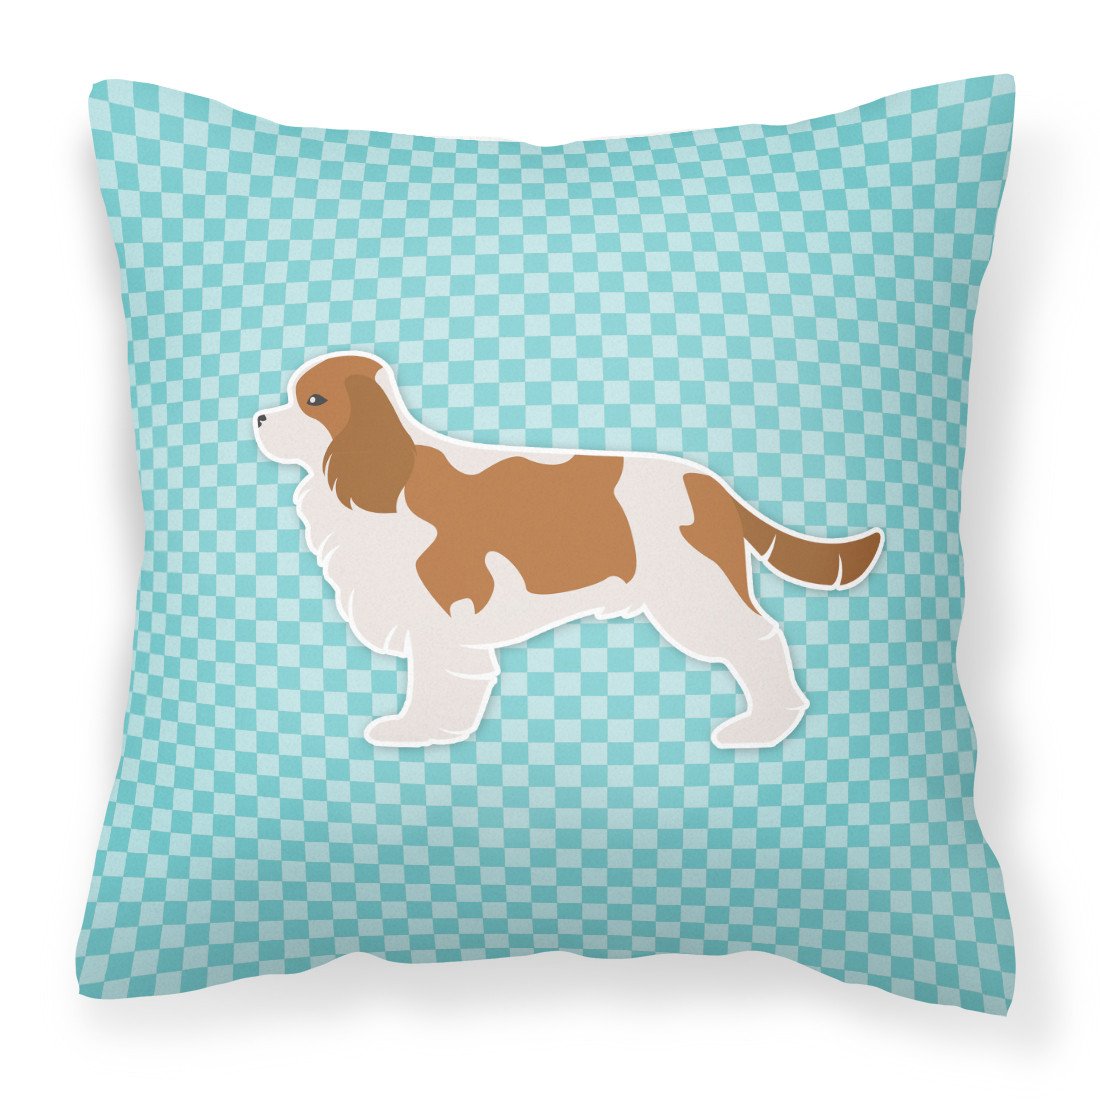 Cavalier King Charles Spaniel Checkerboard Blue Fabric Decorative Pillow BB3749PW1818 by Caroline's Treasures